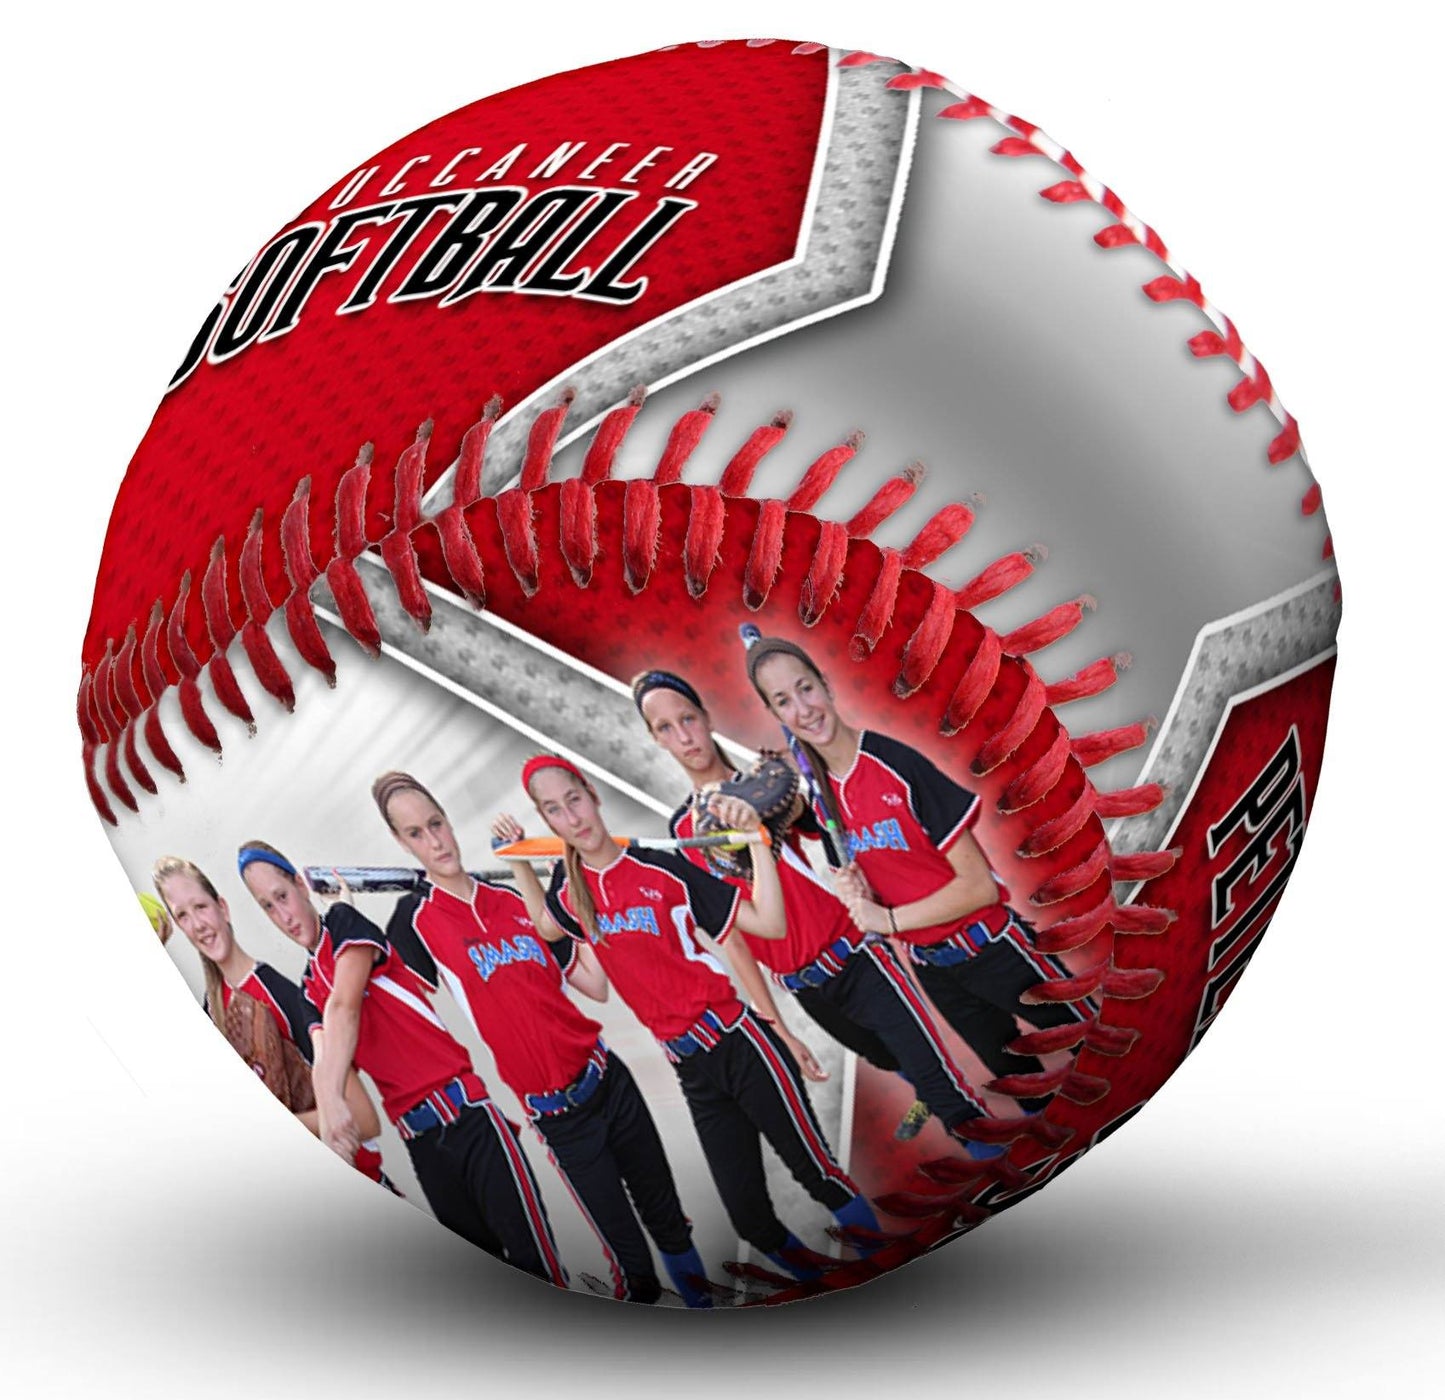 Superstar - V.1 - Make-A-Ball Full Template Collection-Photoshop Template - PSMGraphix